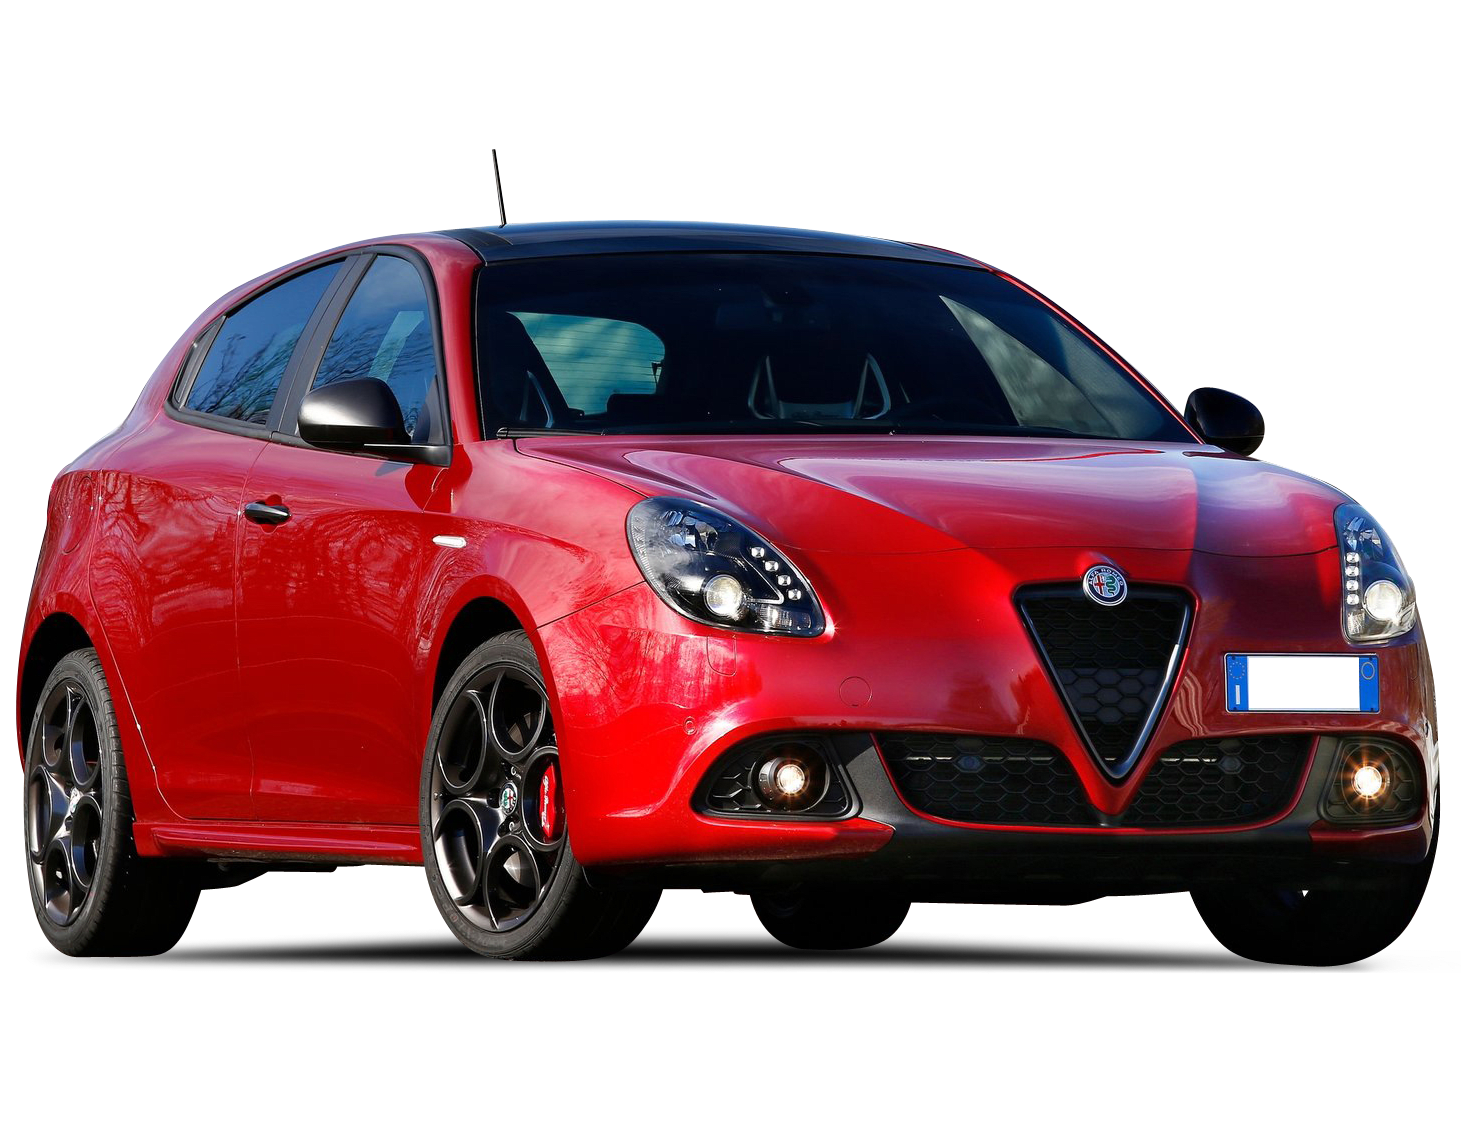 Romeo Giulietta Review, Colours, For Sale, Models & News in Australia | CarsGuide